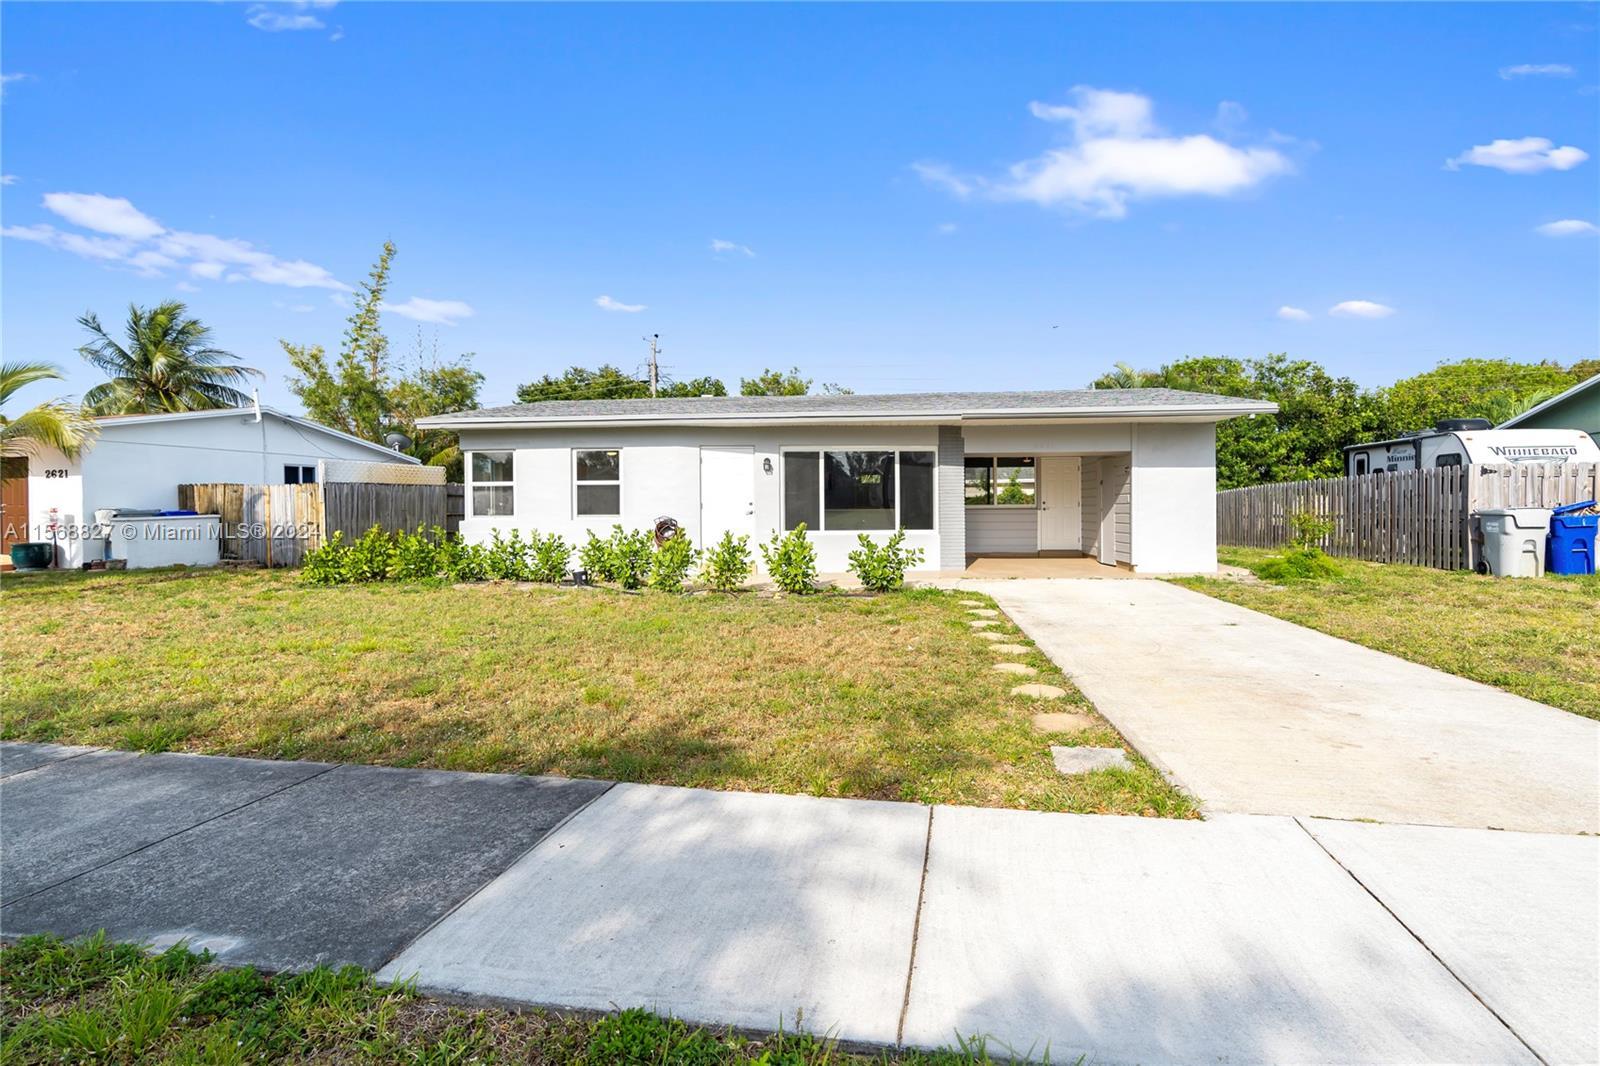 Congratulations! You've found your perfect slice of paradise in Pompano Beach, FL! This brand new 3-